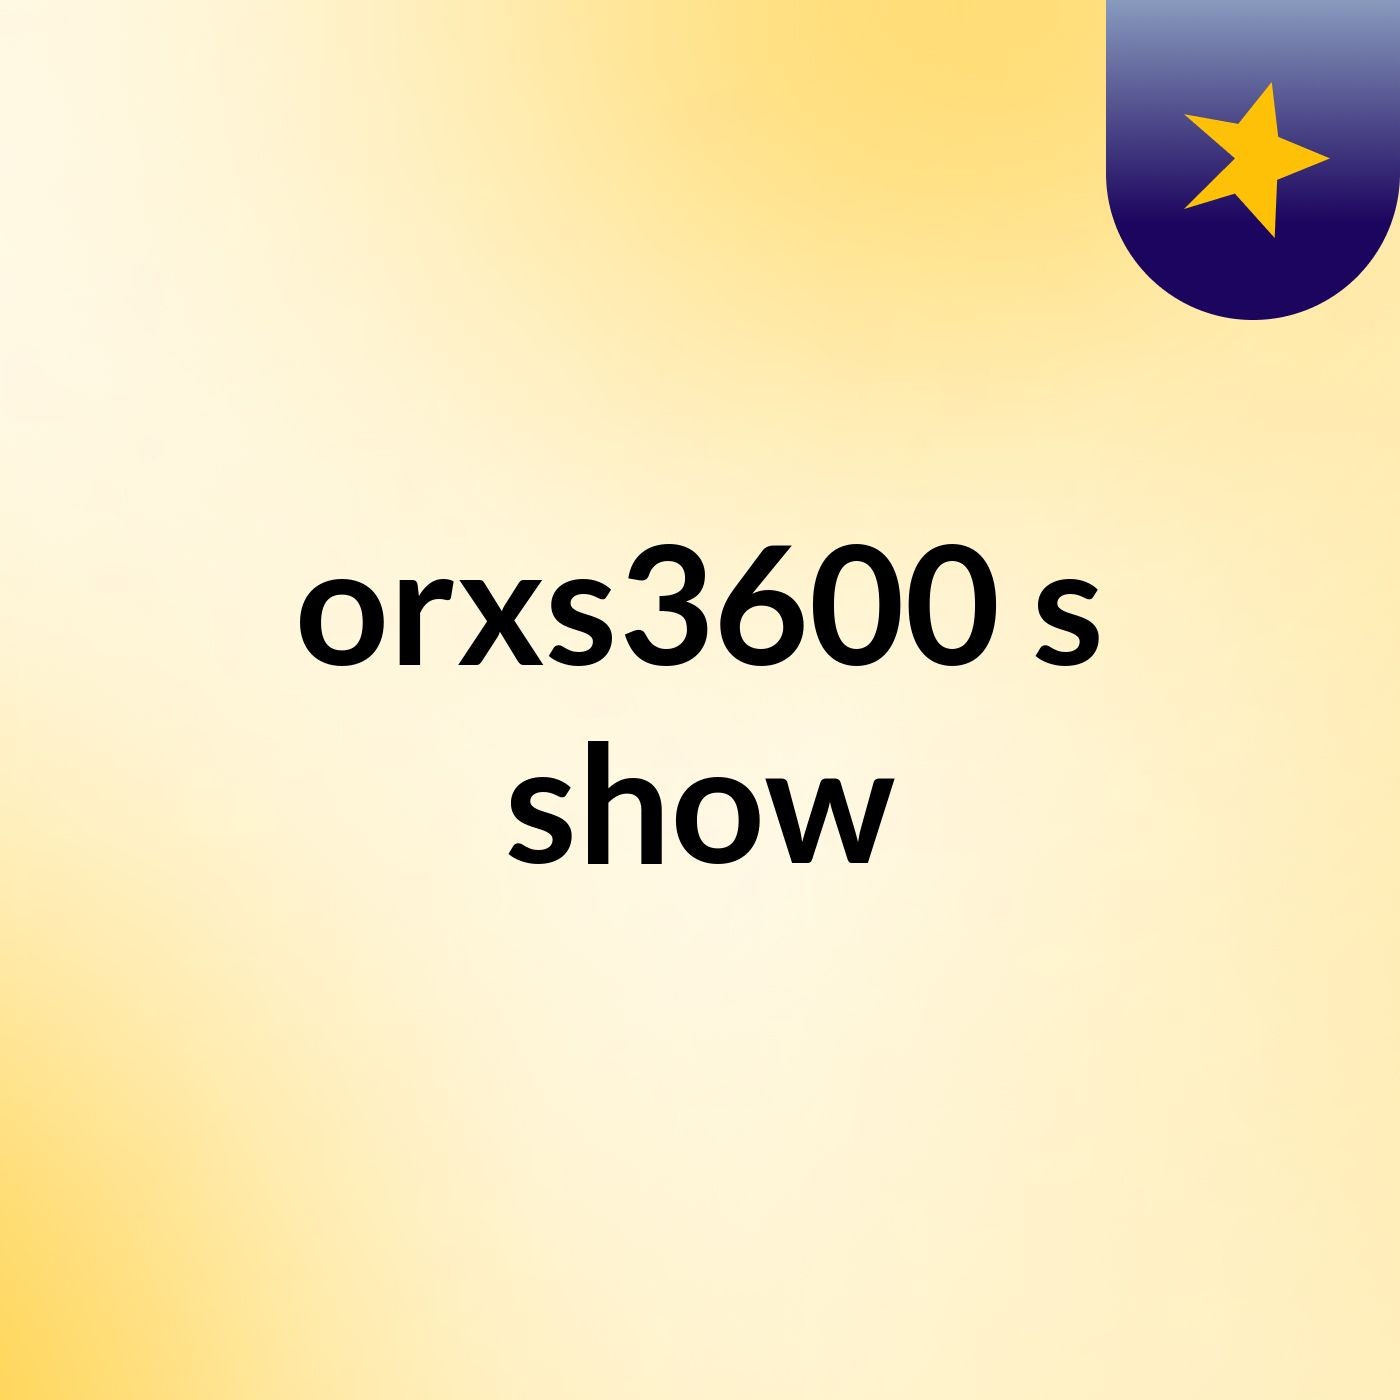 orxs3600's show